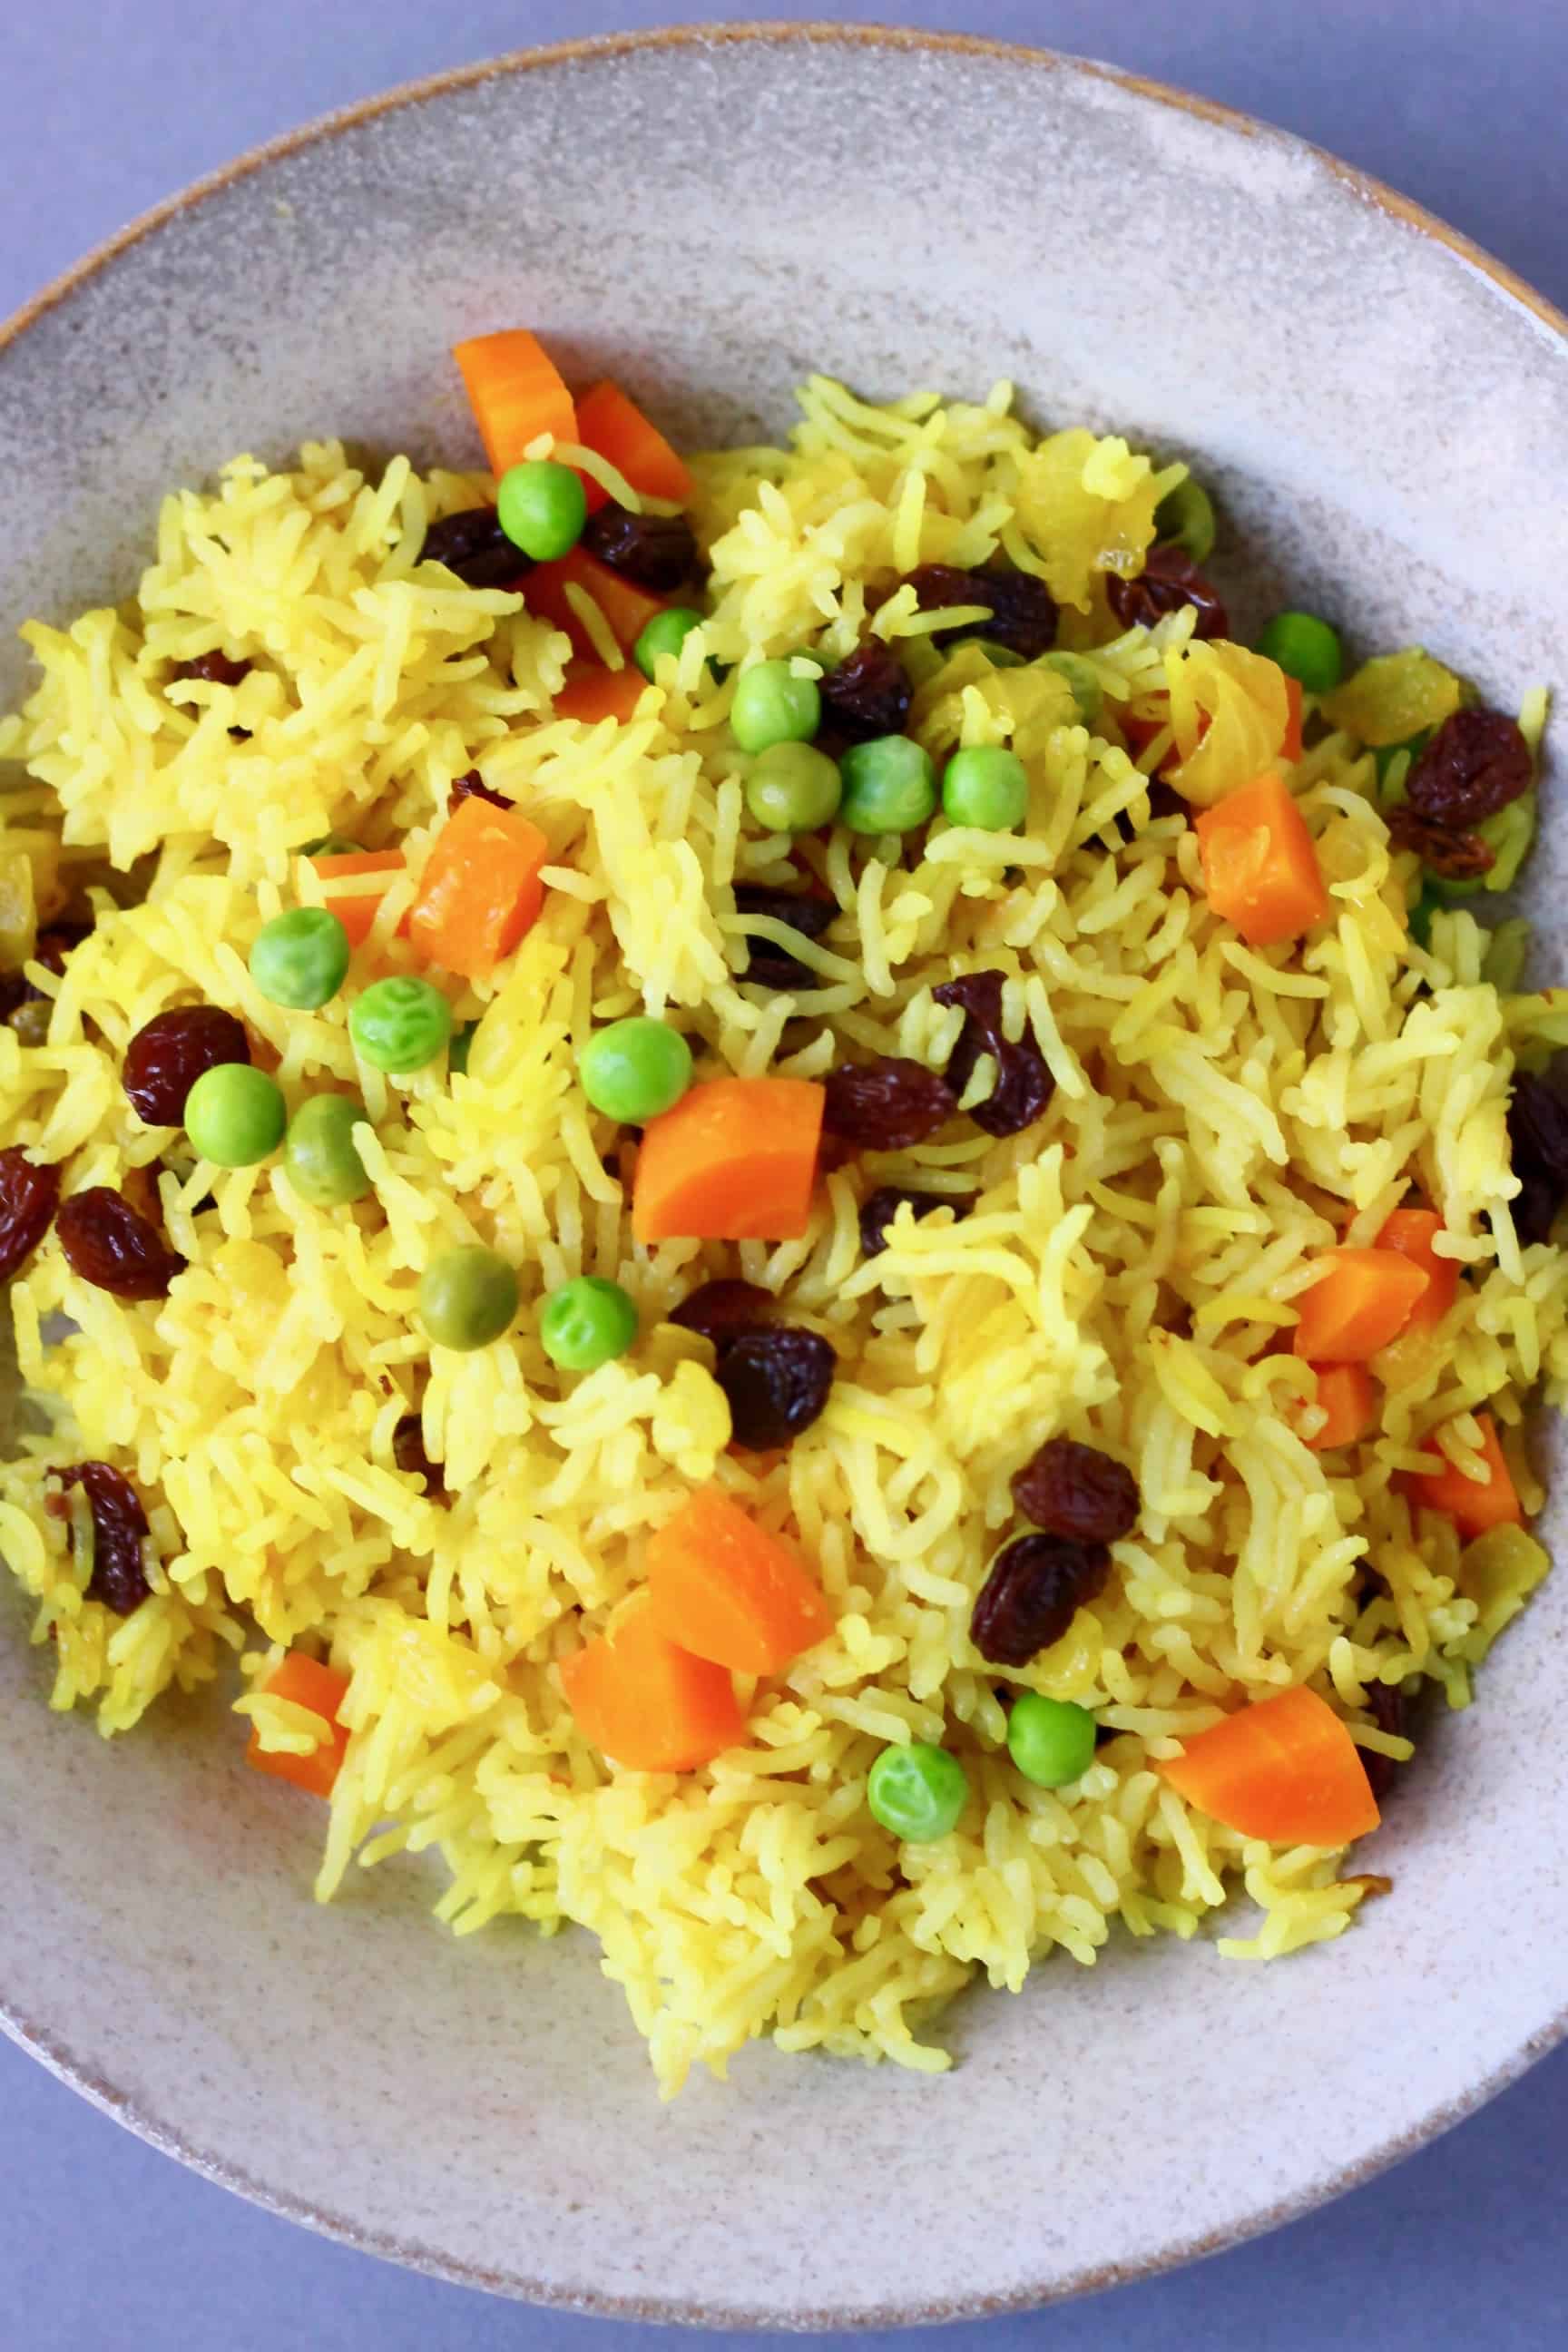 Yellow turmeric rice with vegetables in a ceramic bowl against a grey background